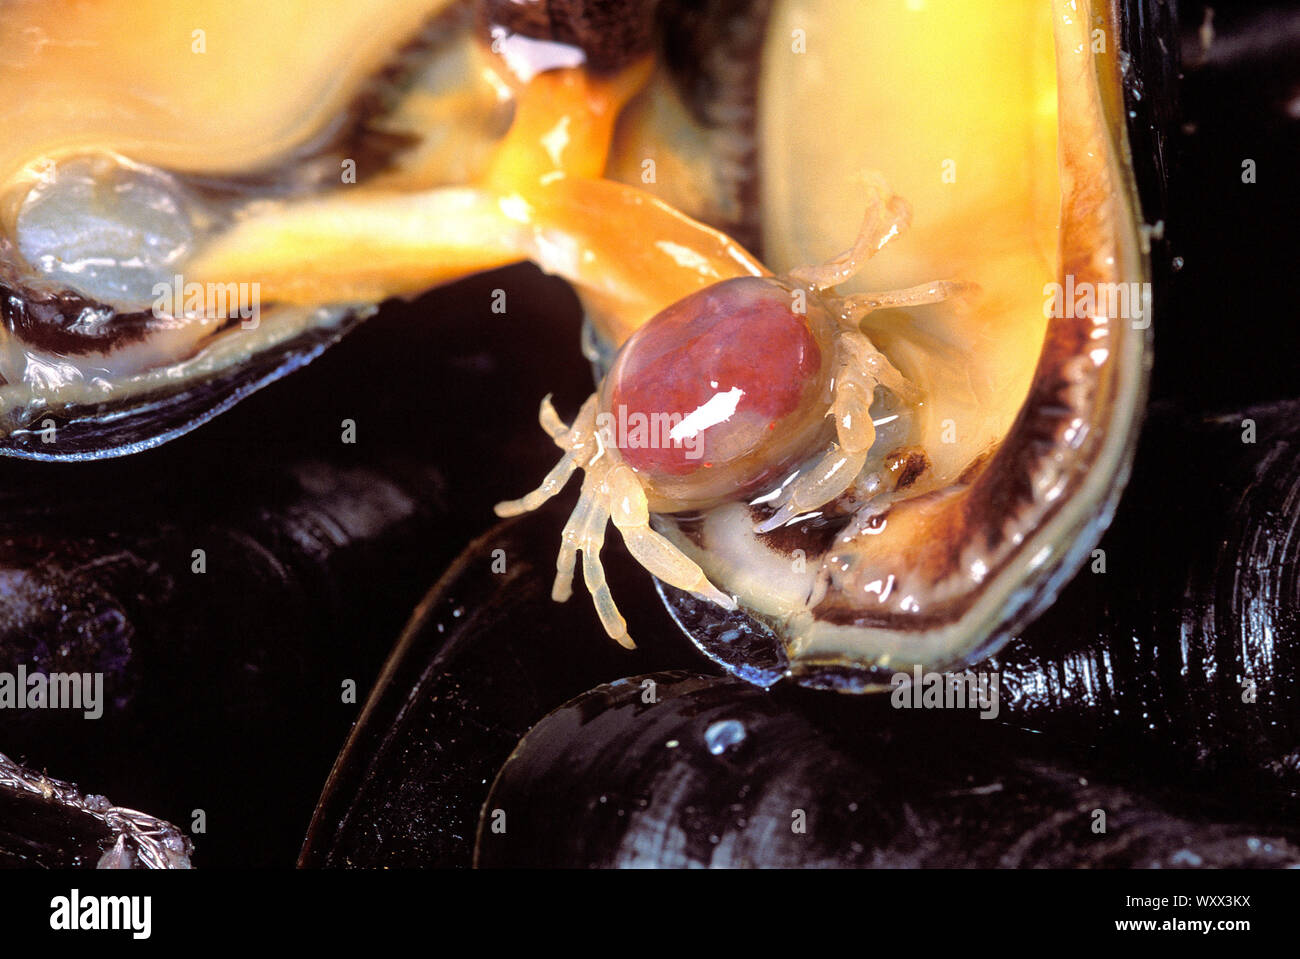 Pea crab (Pinnotheres sp.) in a Mussel (Mytilus edulis) Stock Photo